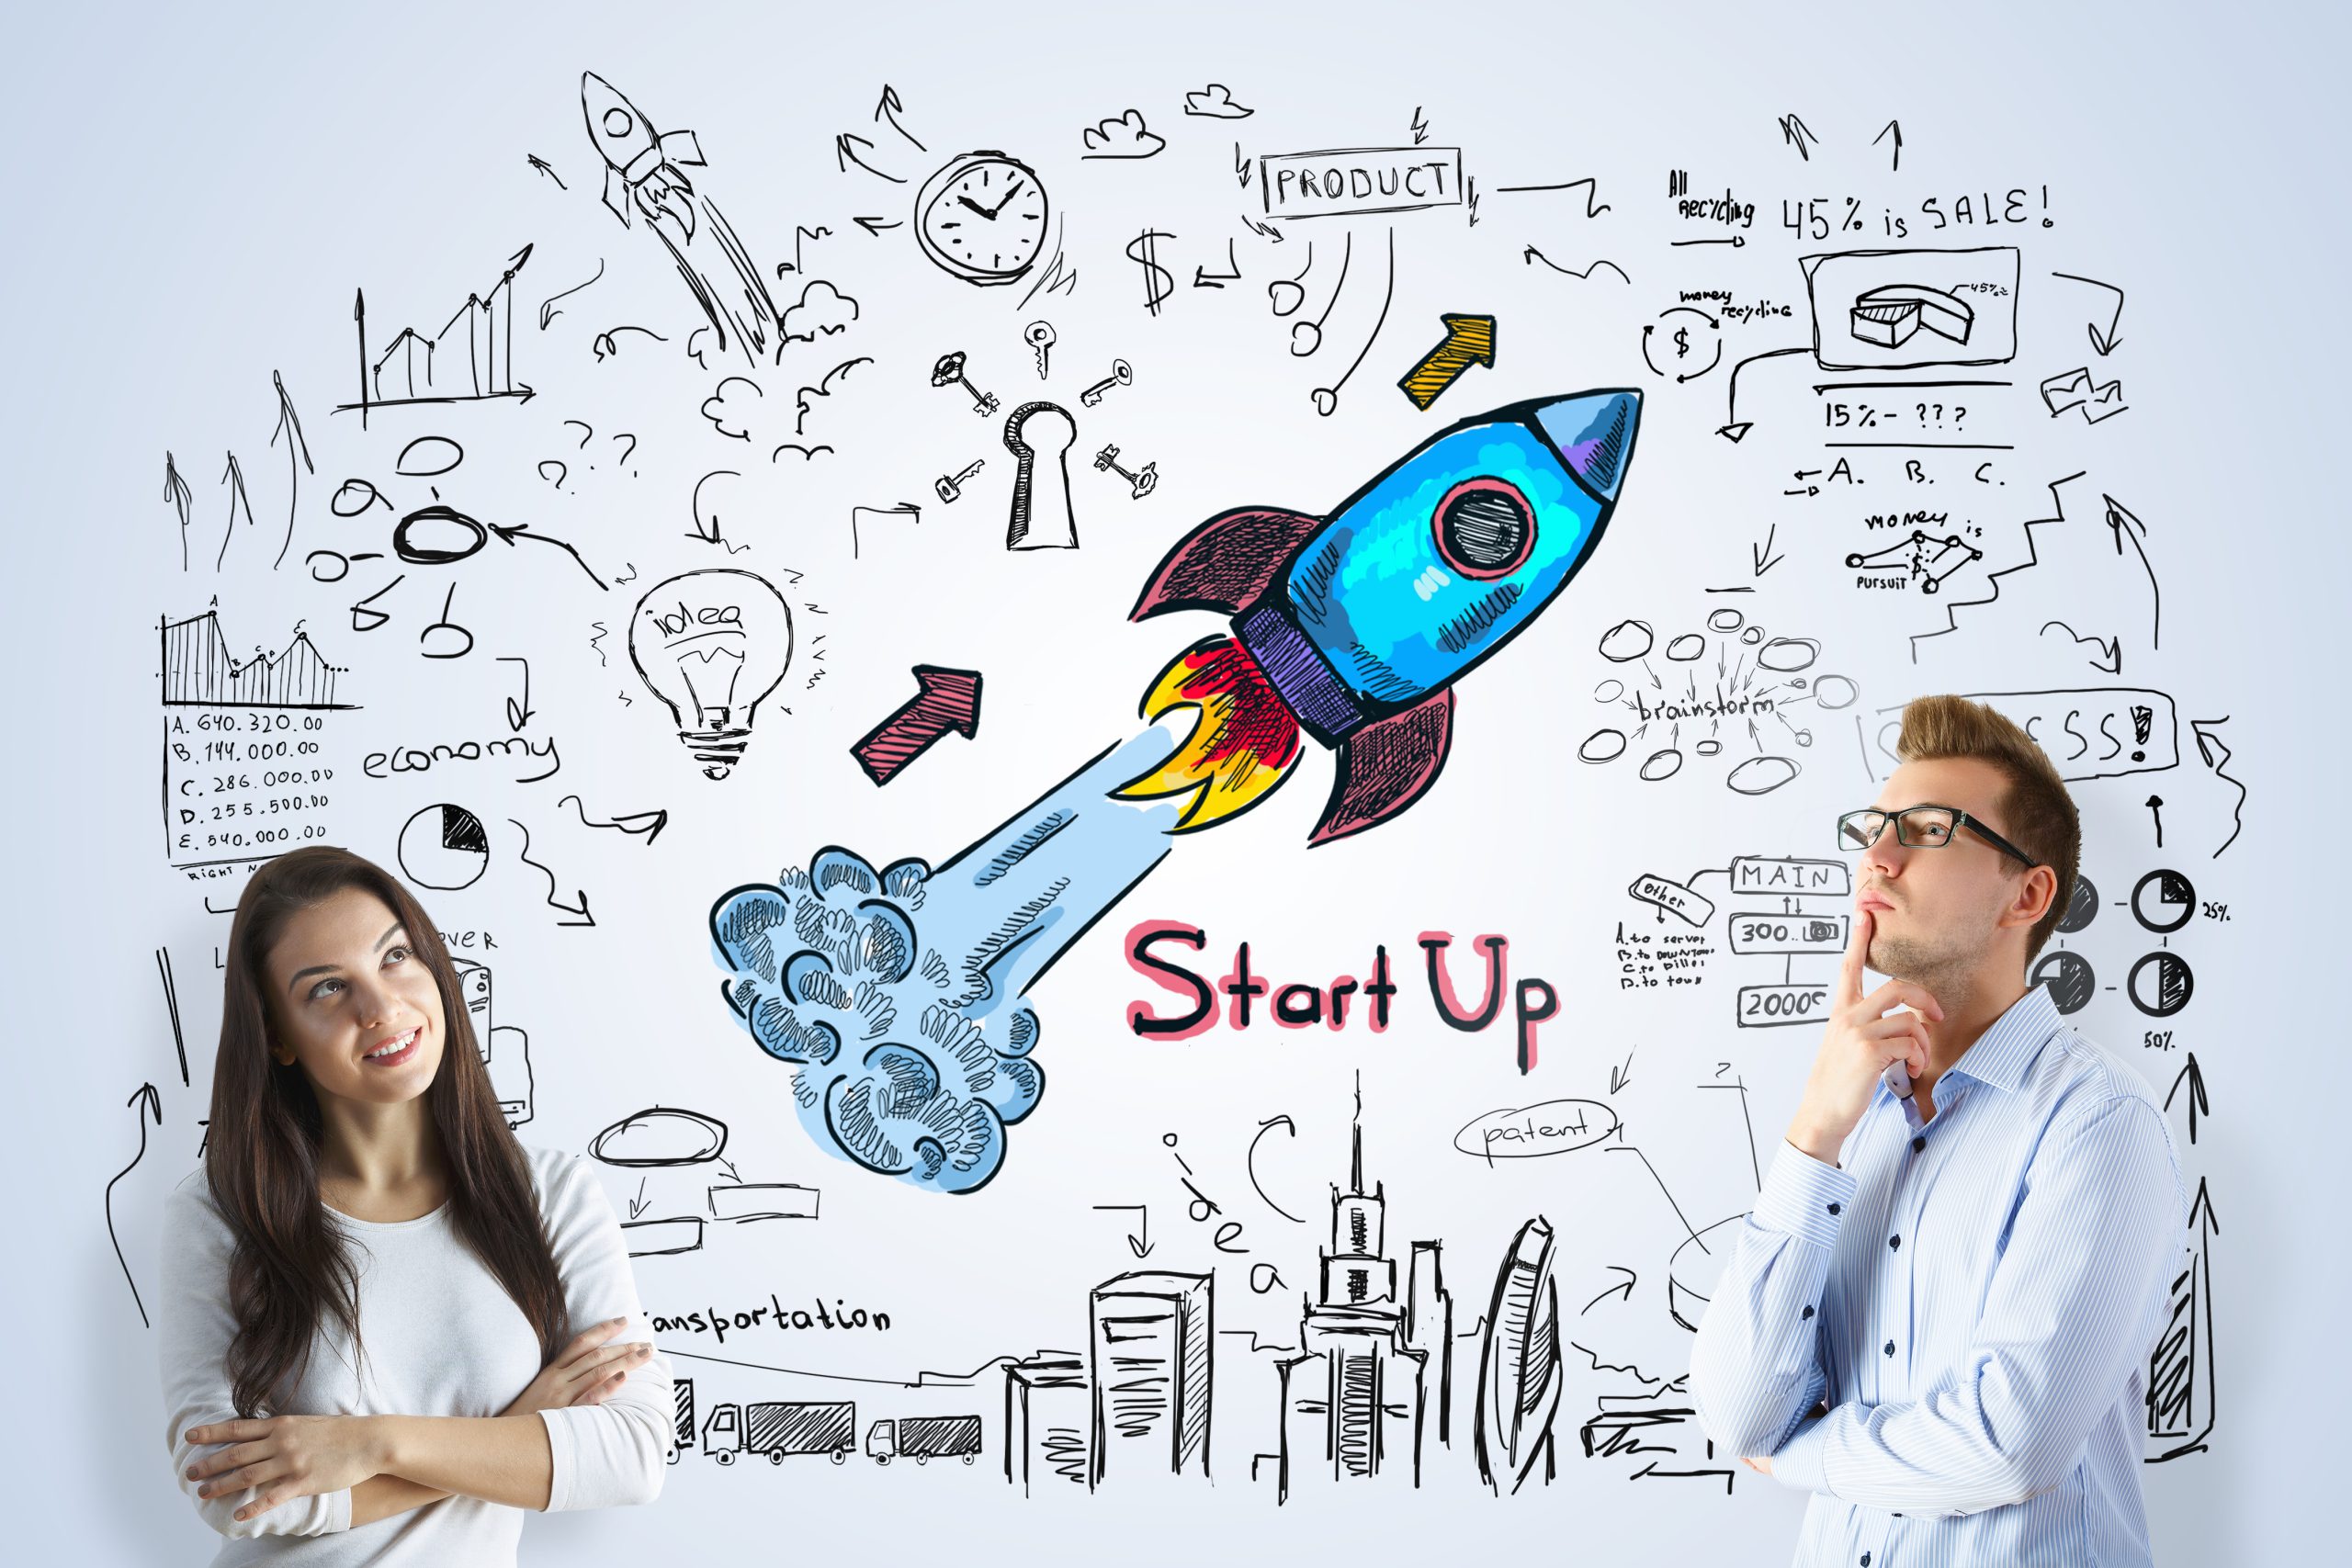 Startup business owners with drawing in background of ideas and a rocket lifting off